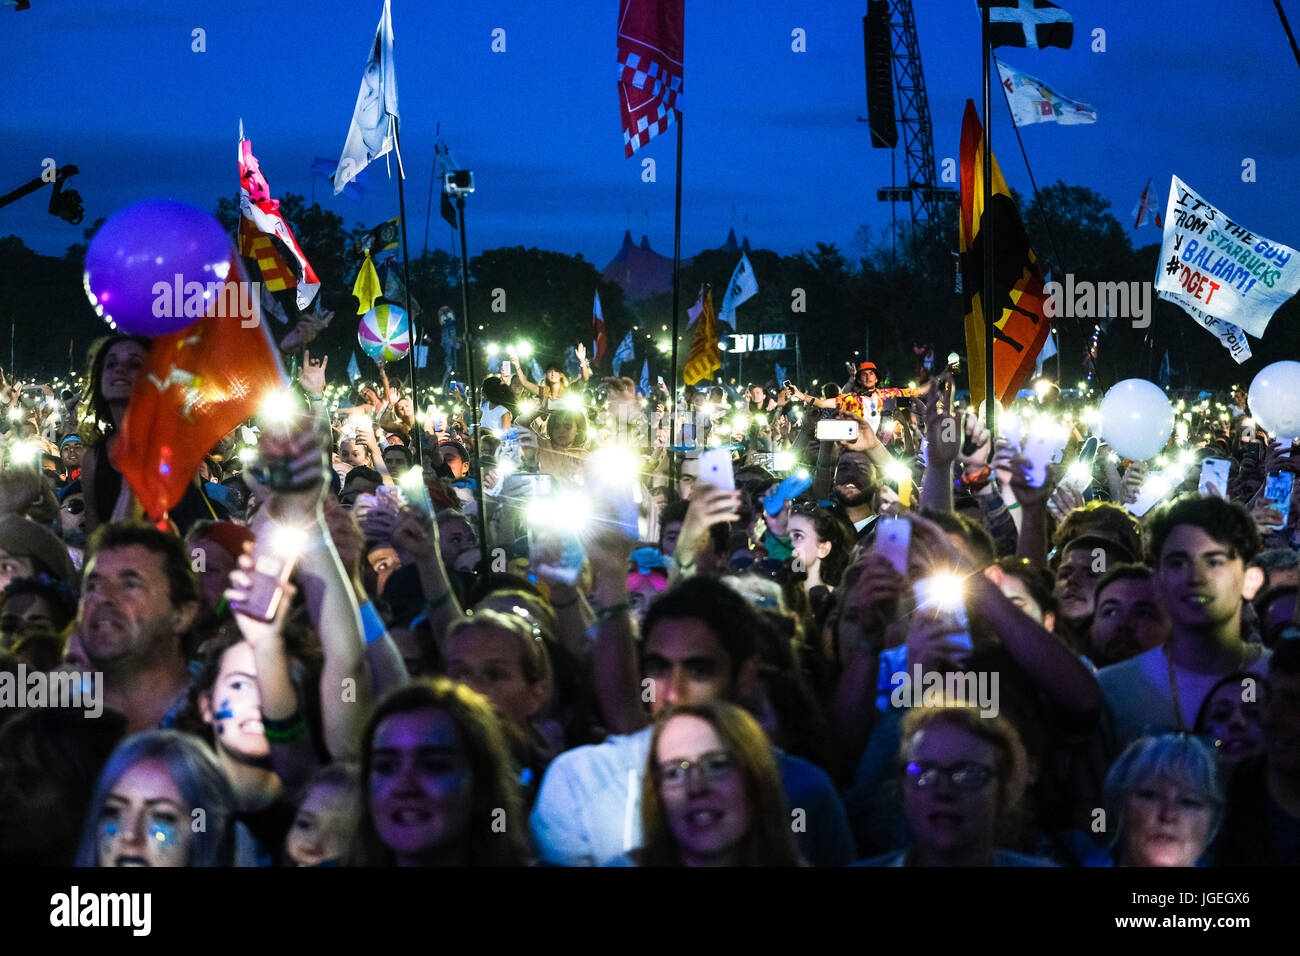 Ed Sheeran at Glastonbury Festival on Sunday 25 June 2017 held at Worthy Farm, Pilton. Pictured: Fans dance and light up the arena as Ed plays . Stock Photo